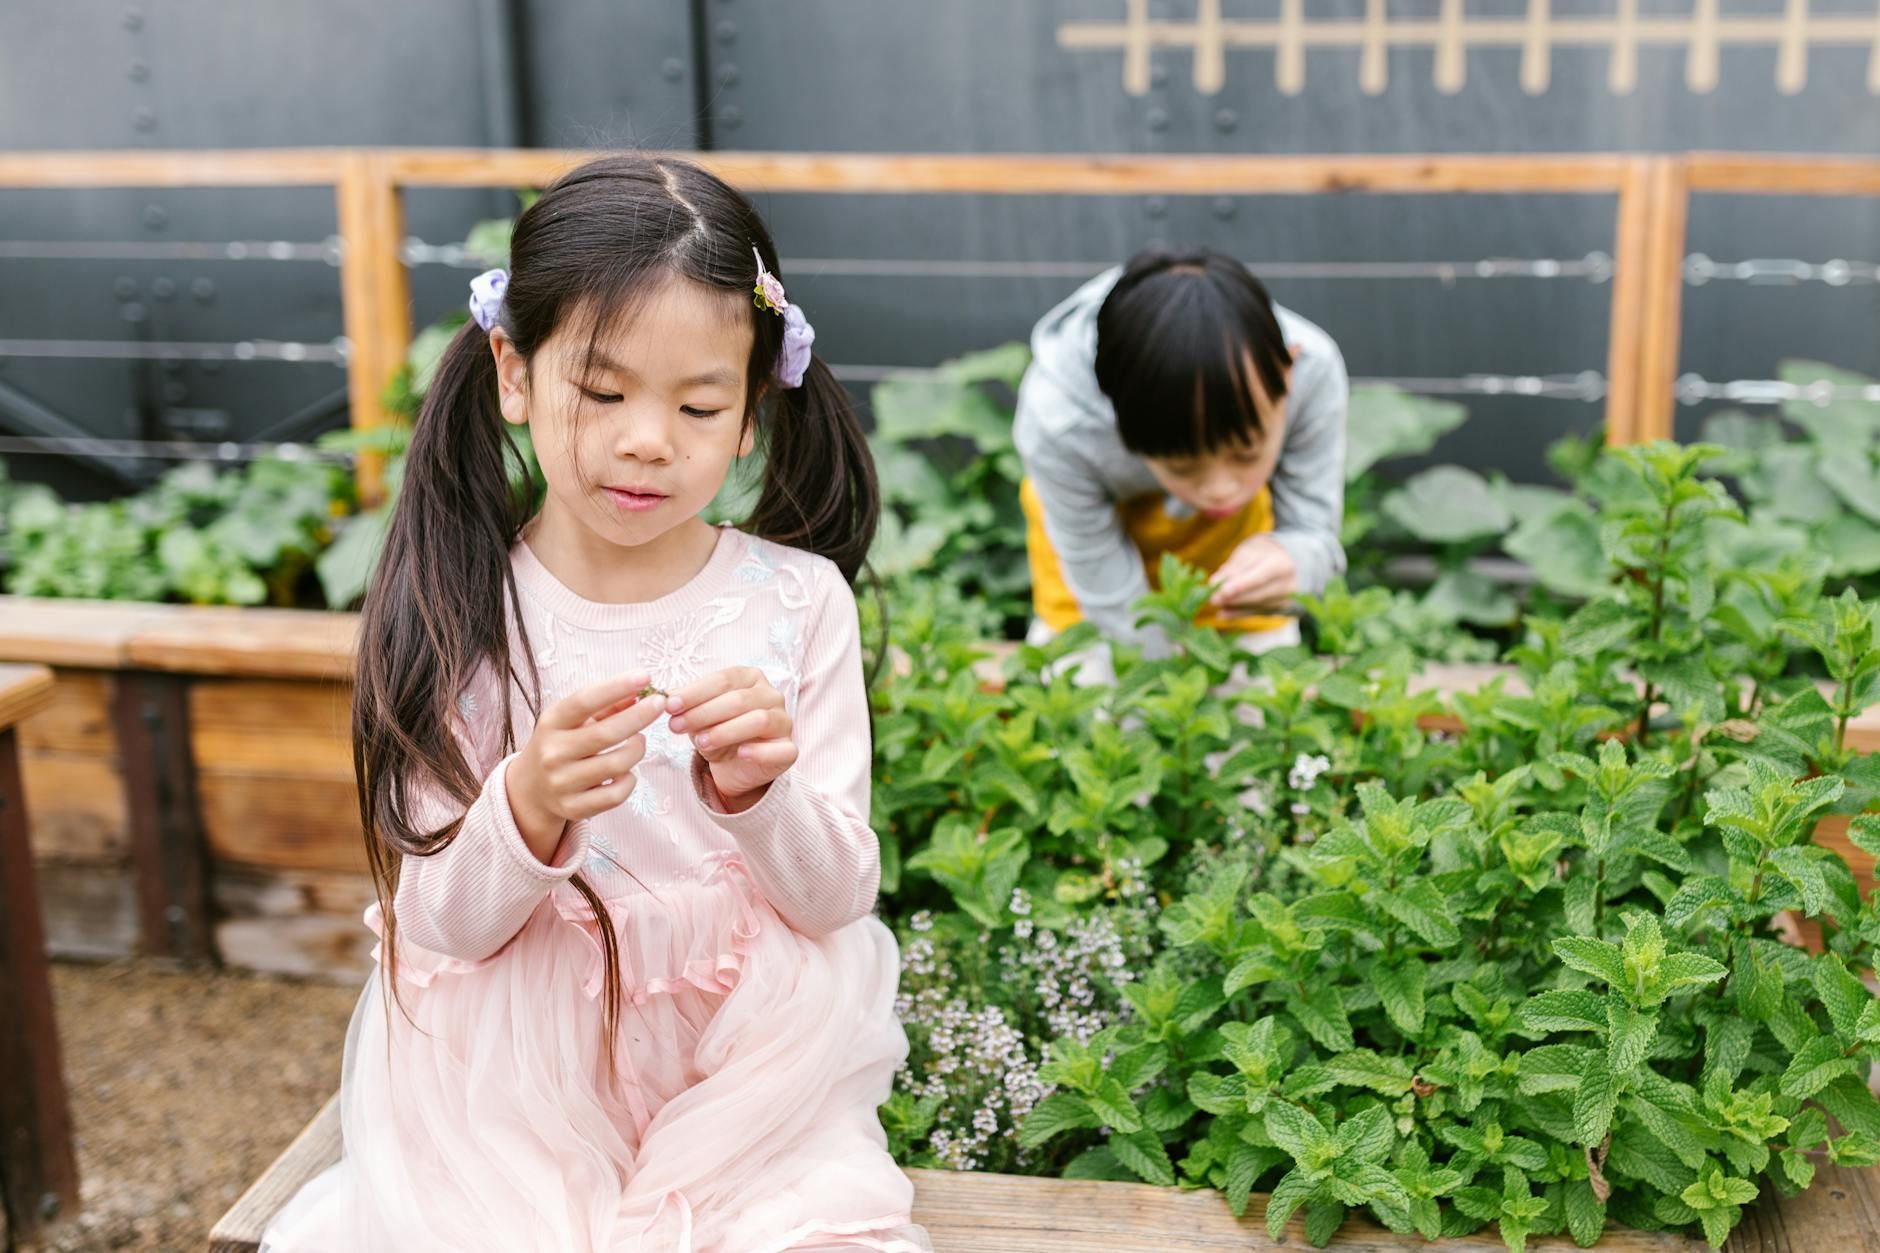 Two little kids sitting in a garden looking at plants